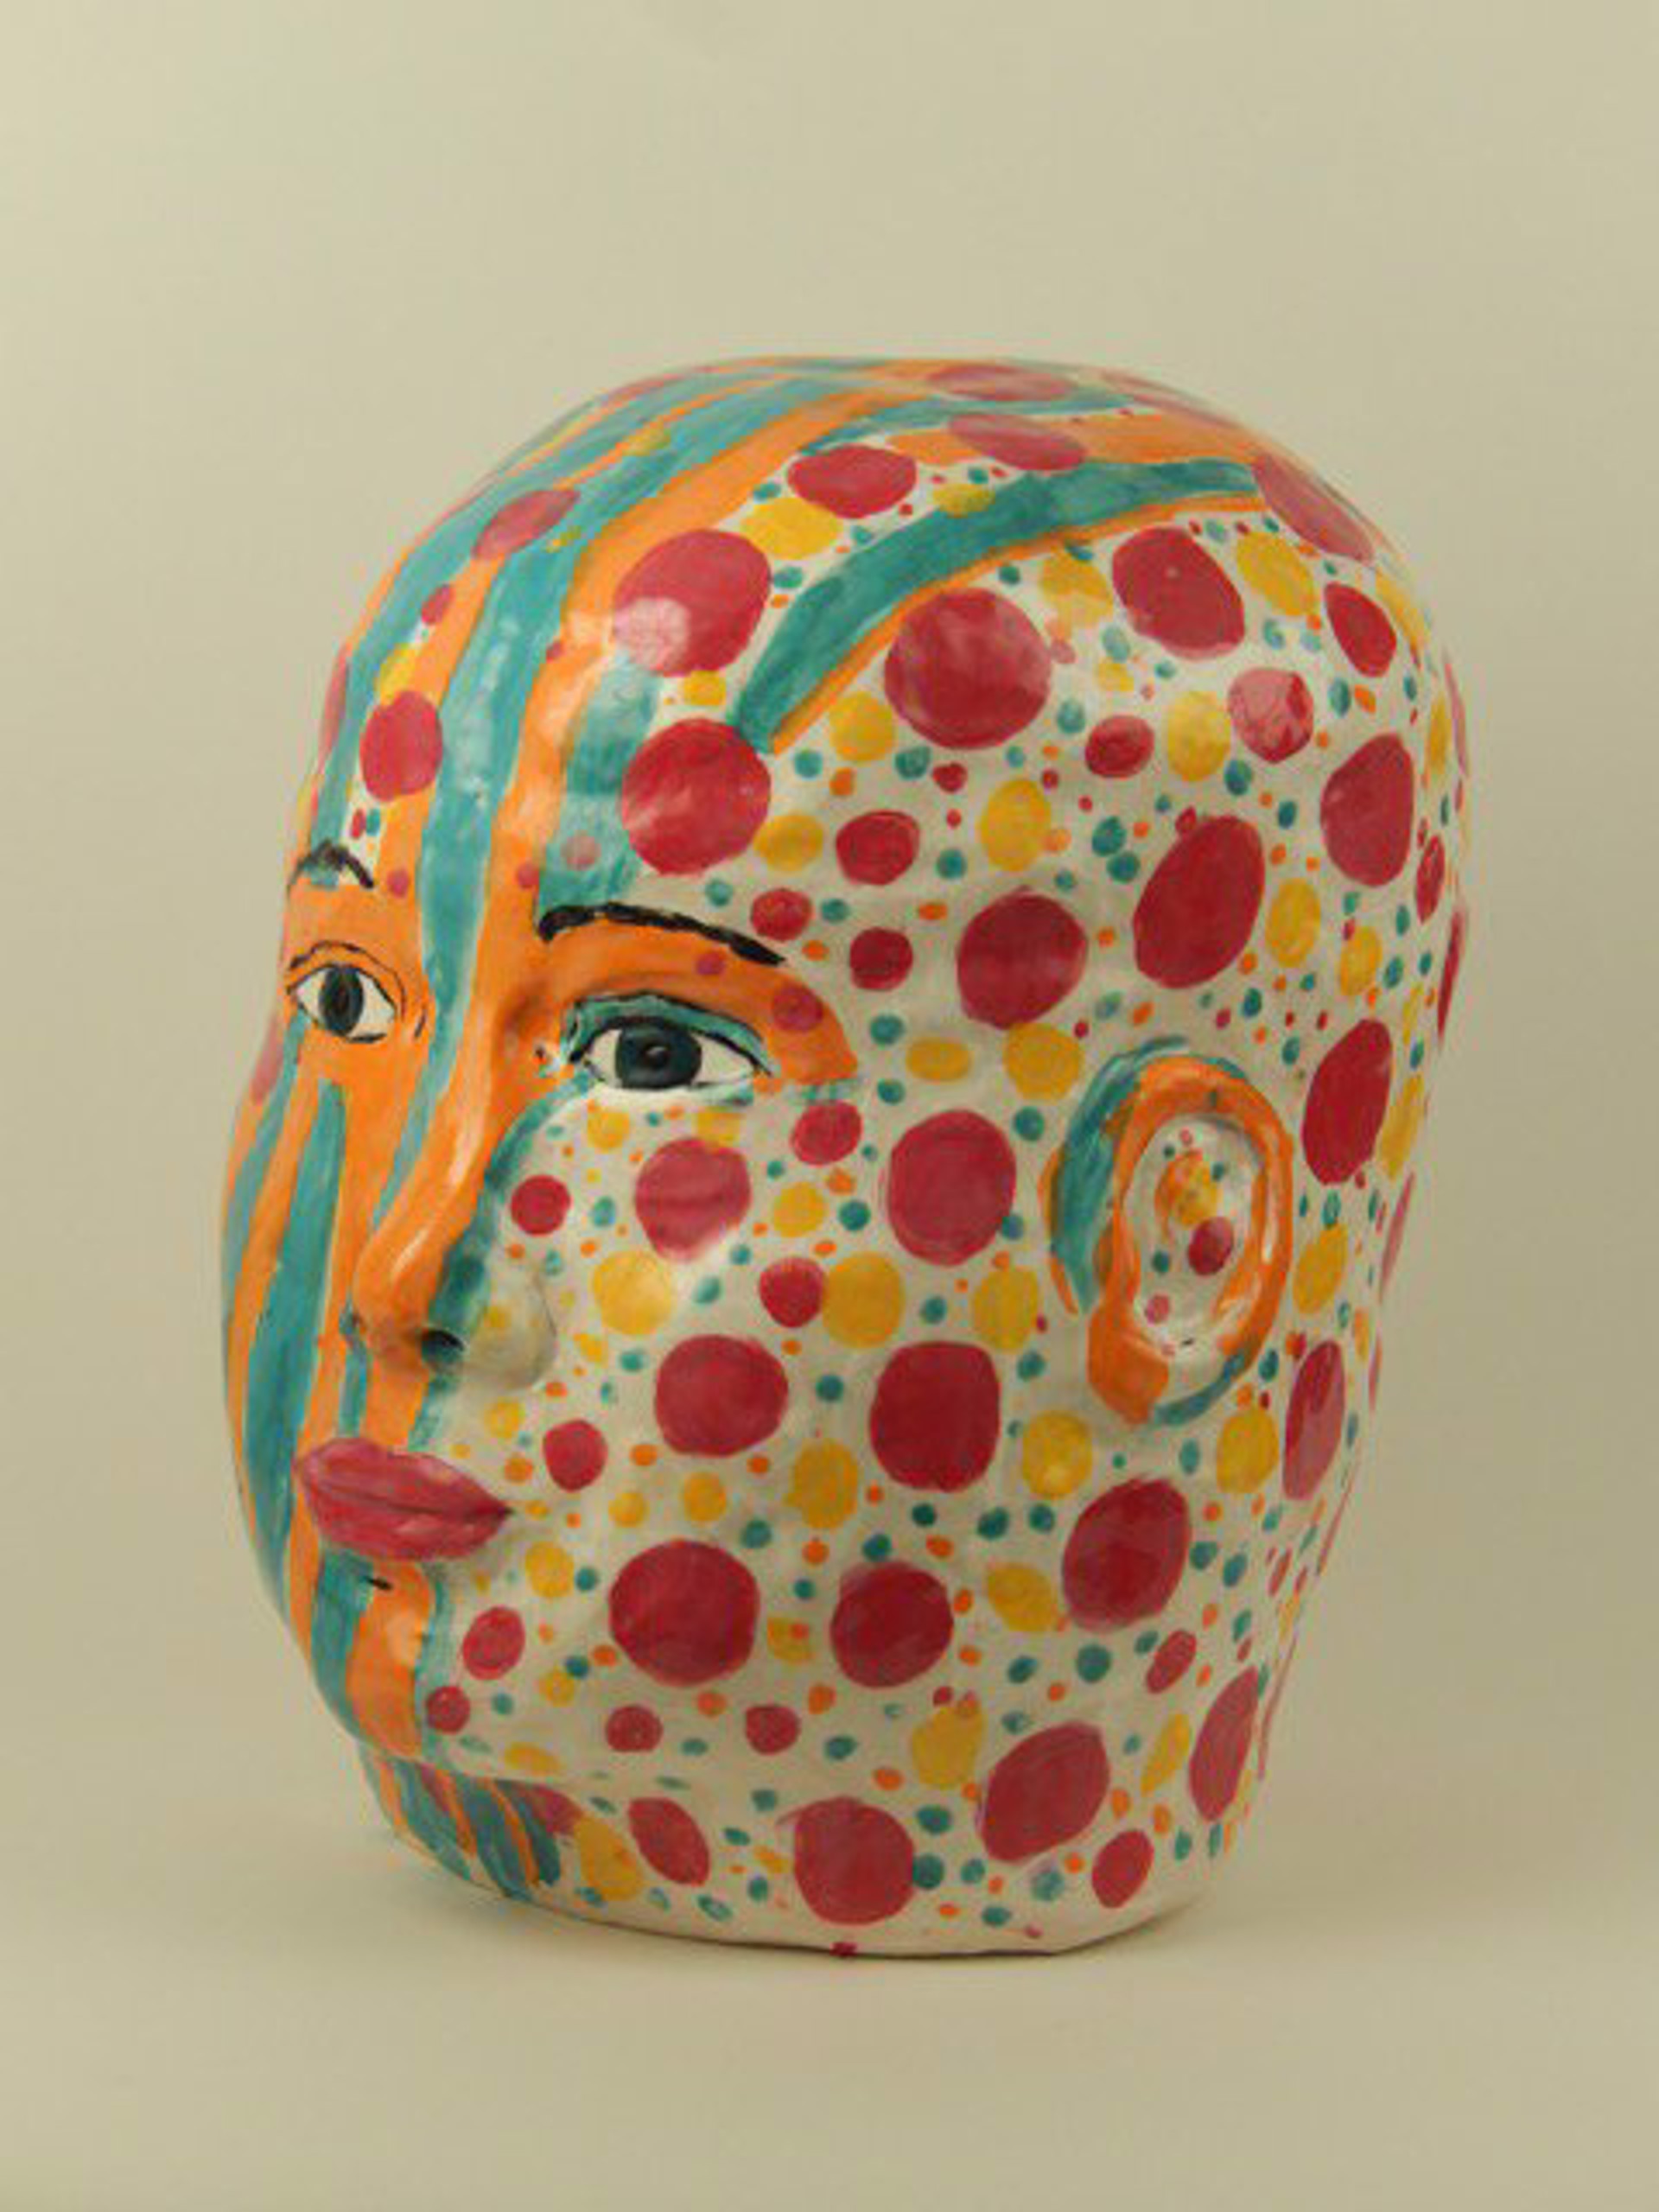 Patterned Head 18 by Linda Smith